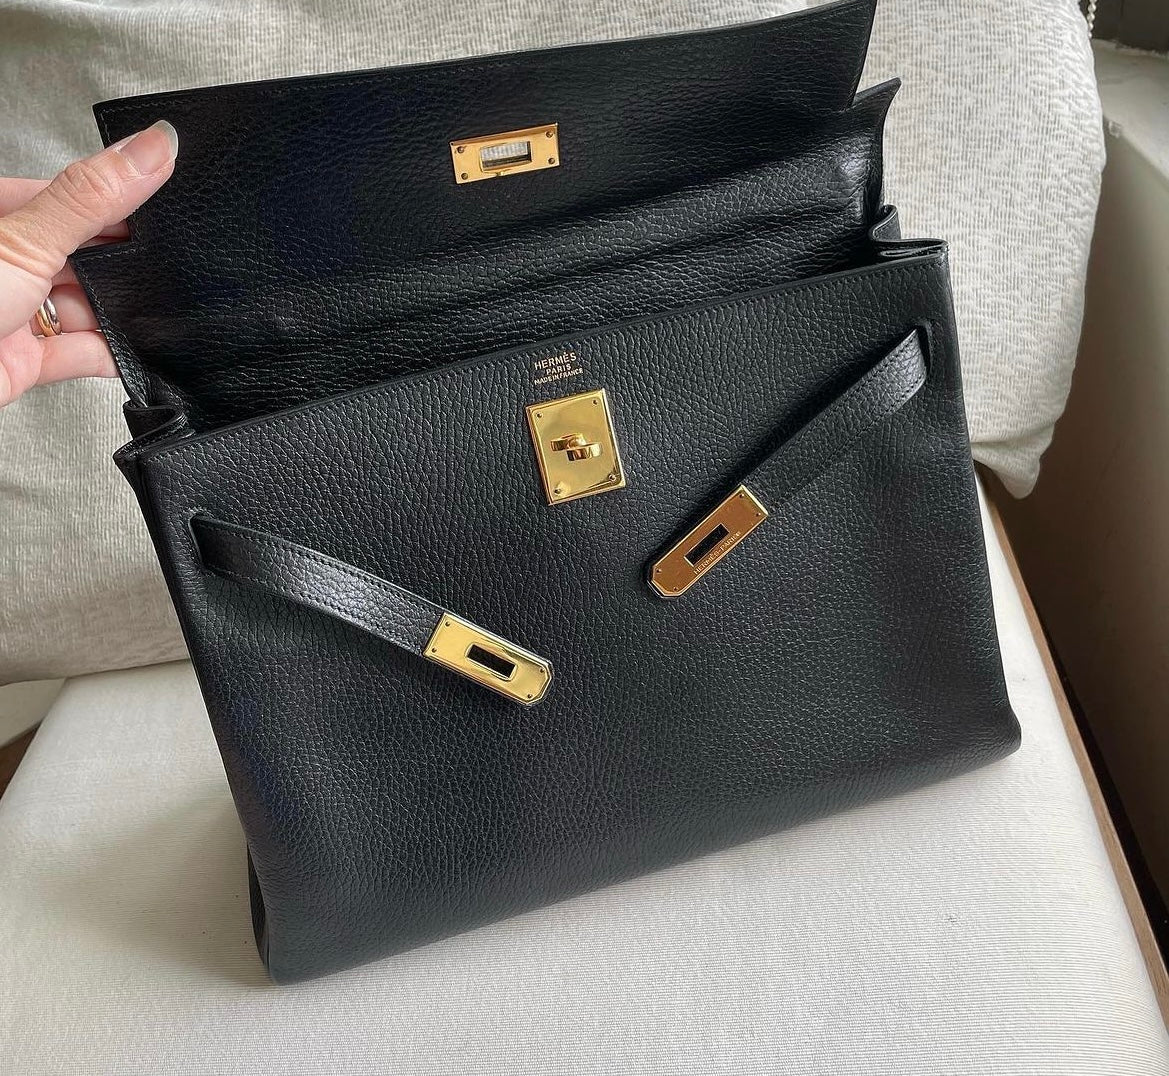 Hermes Kelly 32 Ardennes black ghw - PARTIAL PAYMENT